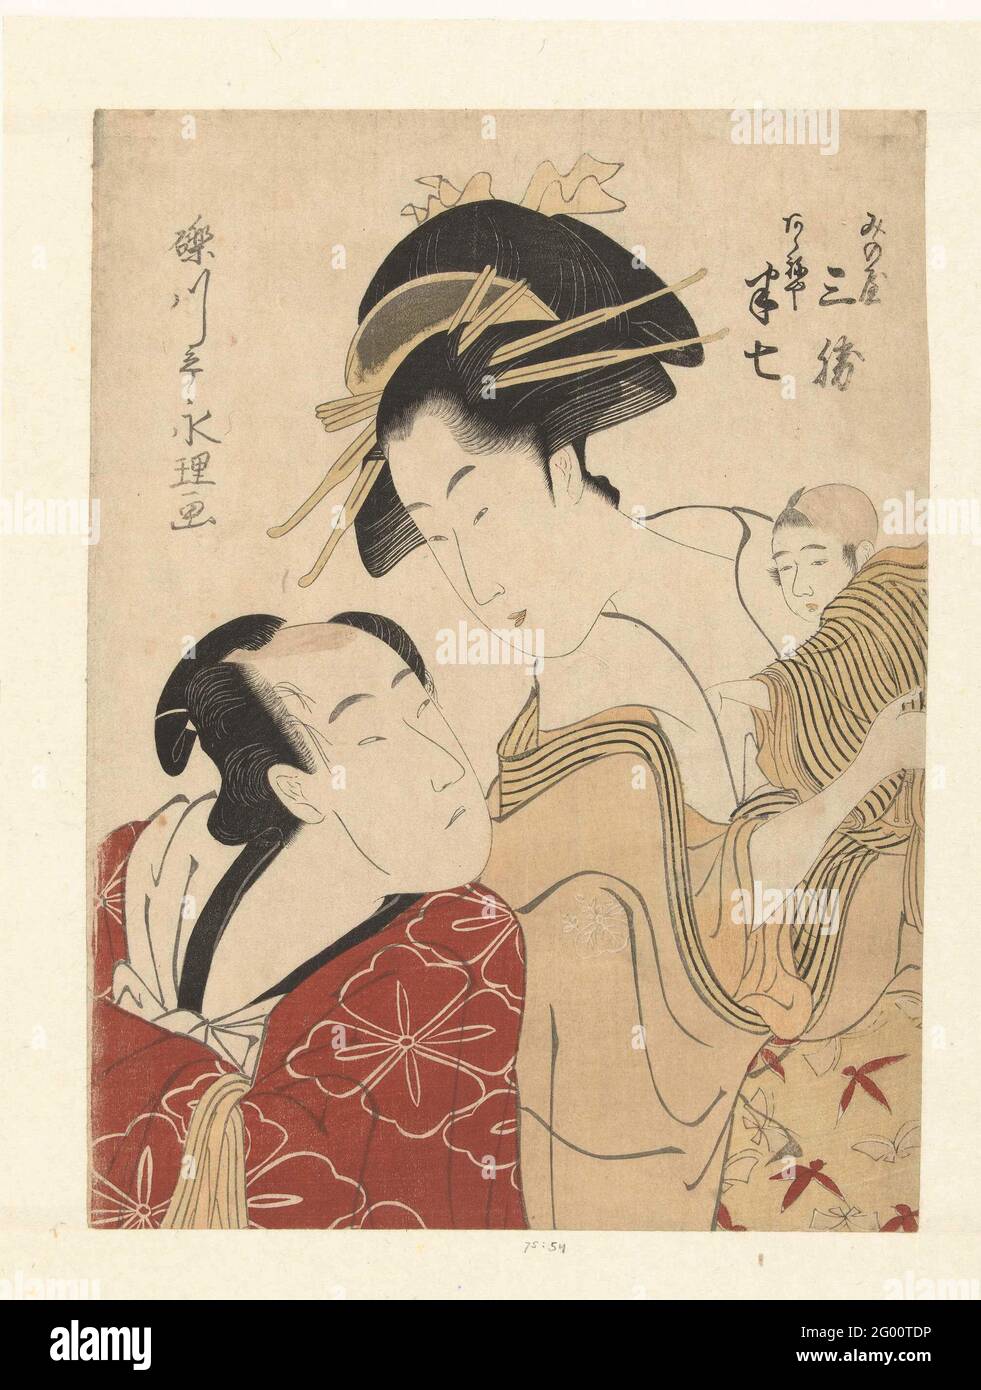 The loved ones Akeneya Hanshichi and Minoya Sankatsu.; Minoya Sankatsu, Akeneya Hanshichi. Akeneya Hanshichi, in red robe, waving to his loved one, the Courtisane Minoya Sankatsu, in yellow kimono, with their child in the arms. Stock Photo